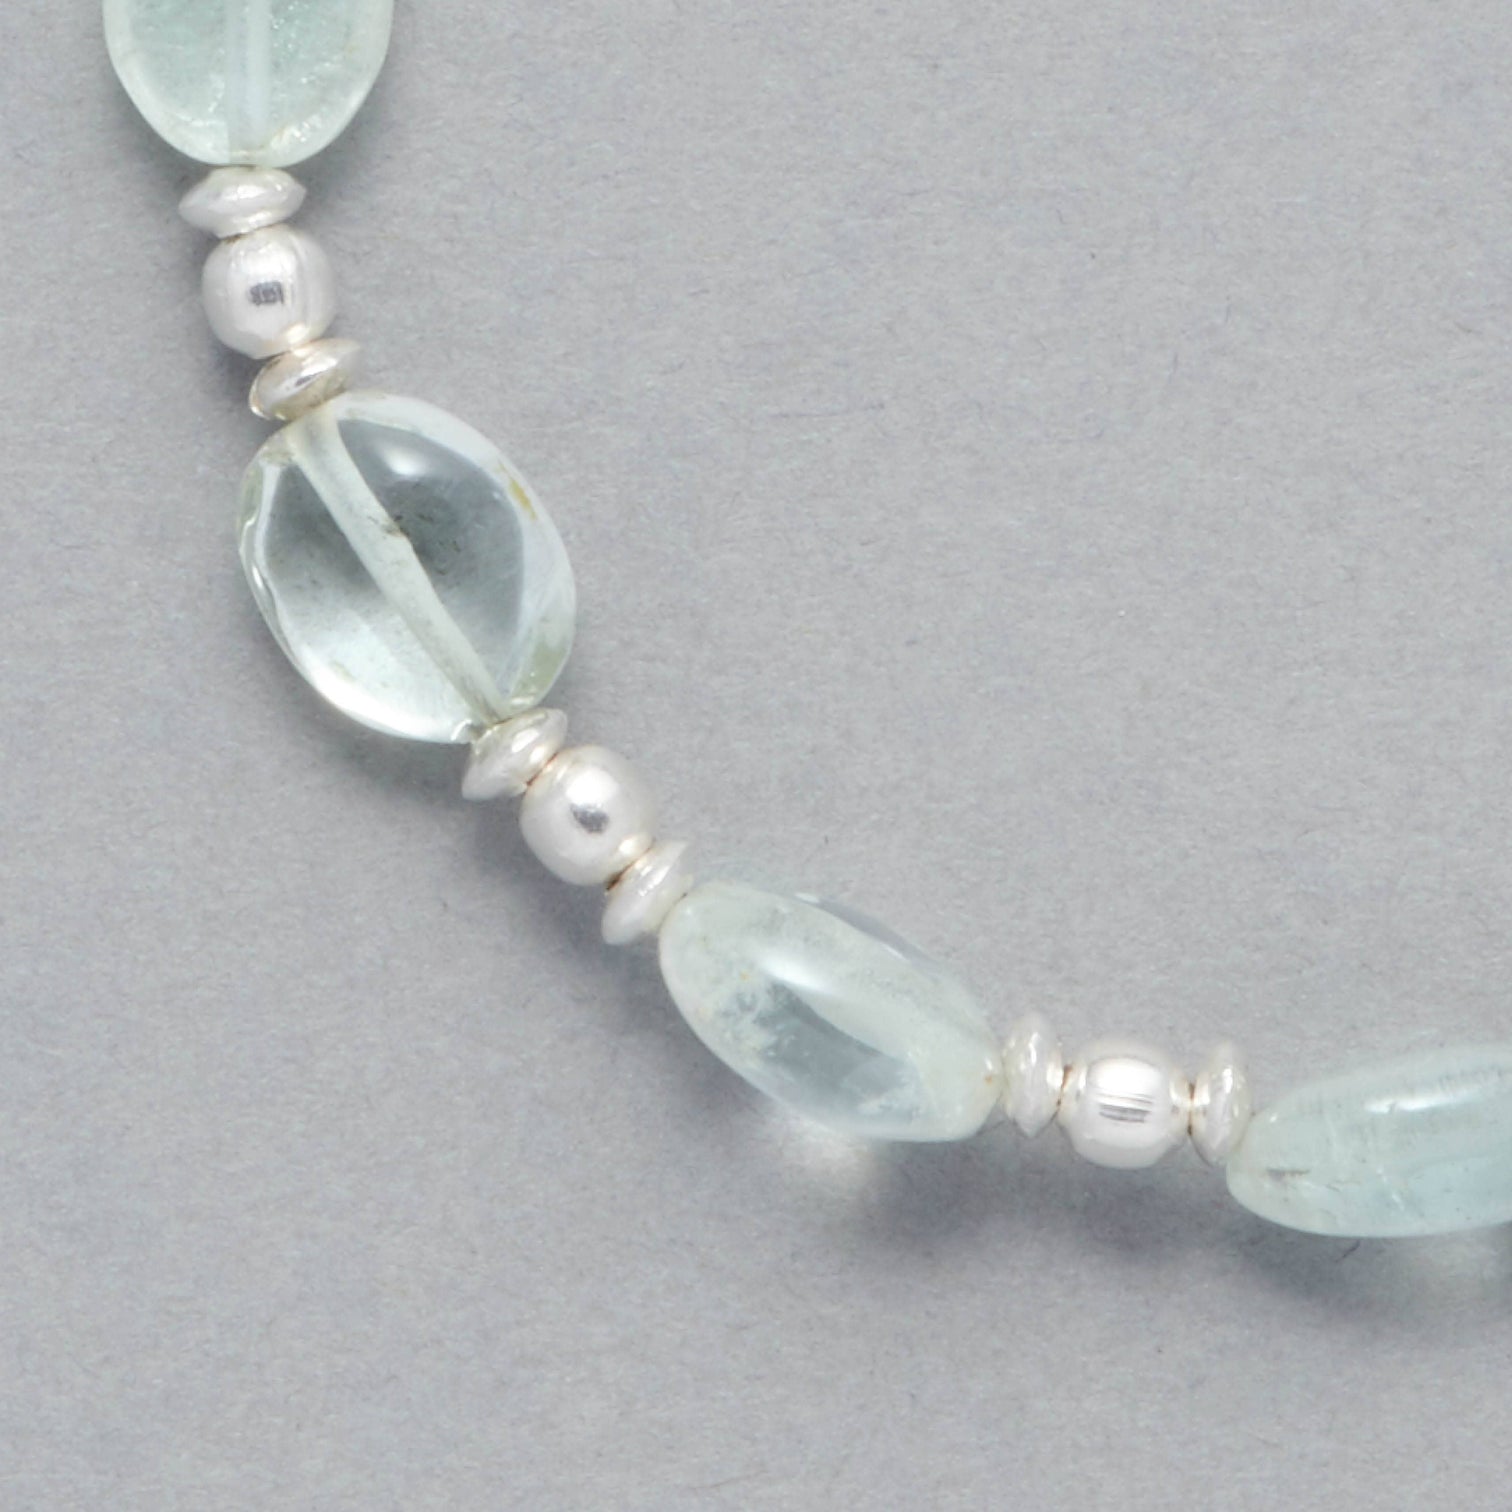 Detail shot of the Zoe Bracelet made with oval-shaped Aquamarine and Sterling Silver elements. 